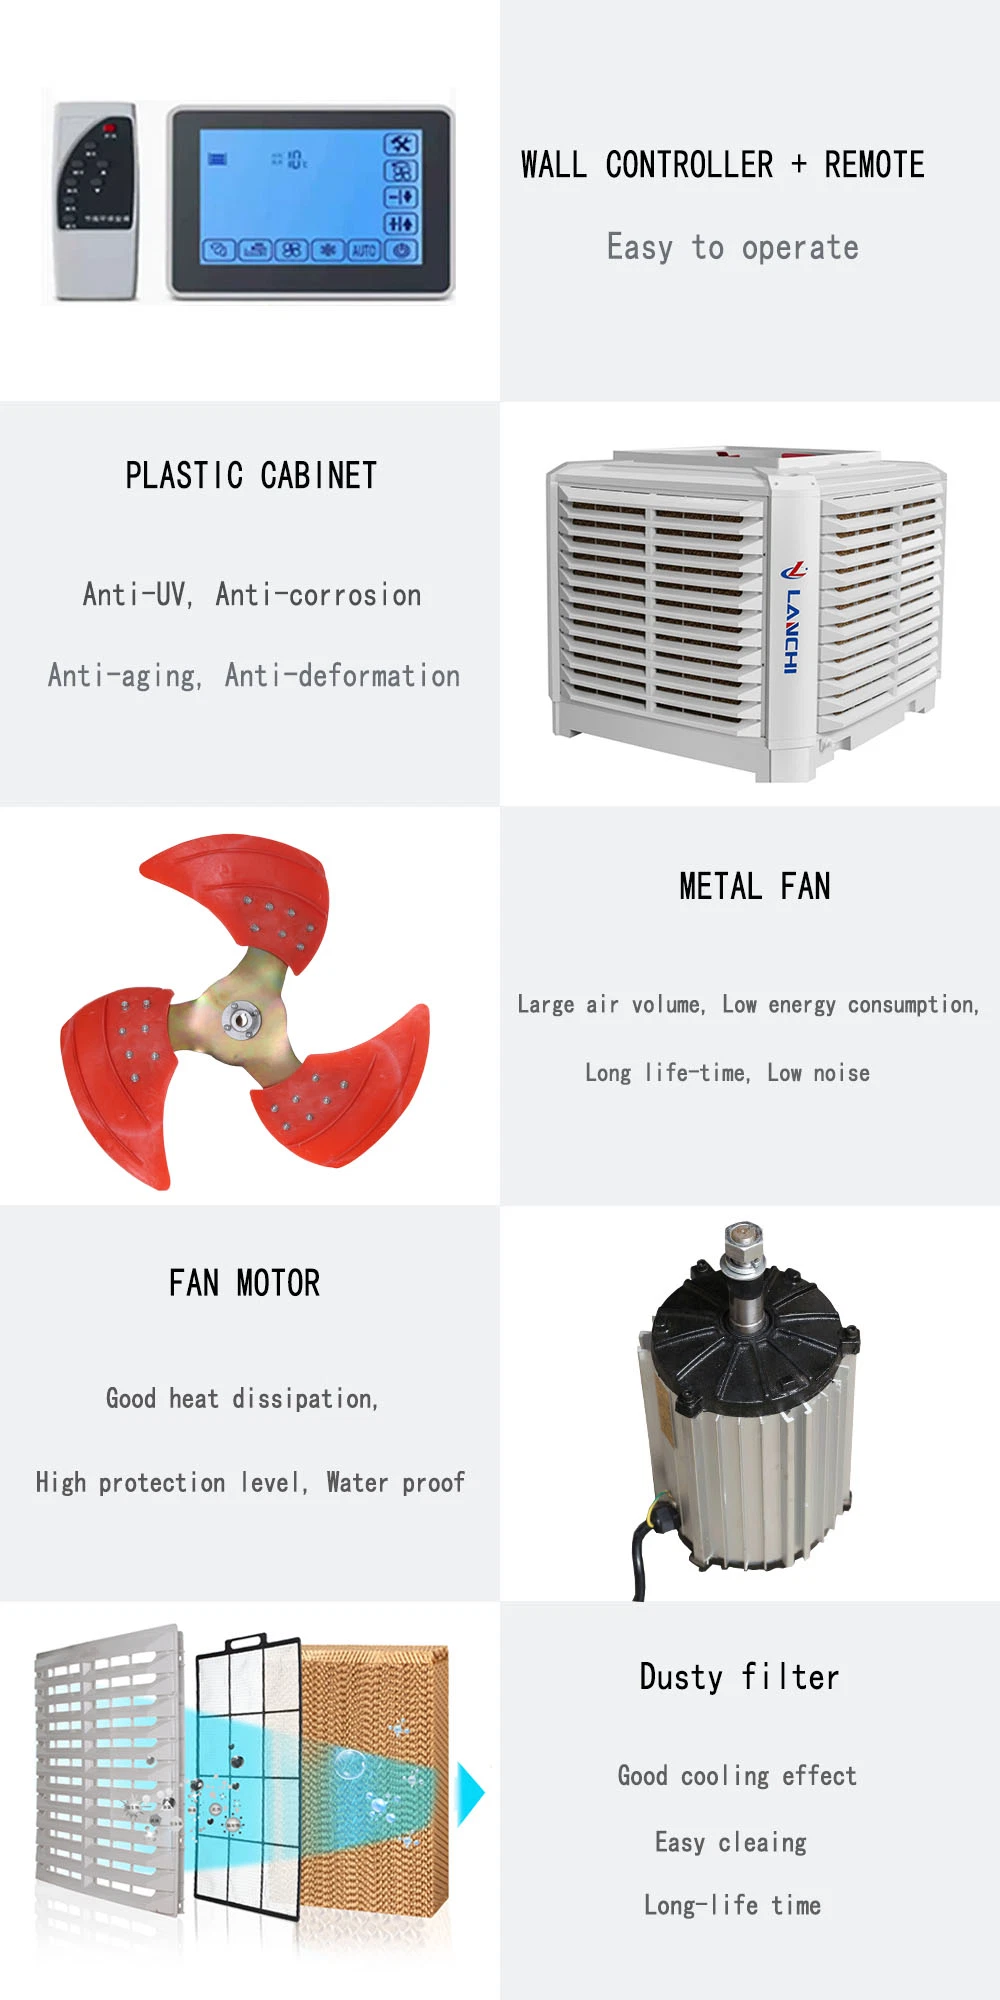 New PP Material 1.1kw 18000CMH Evaporative Cooling Portable Air Cooler